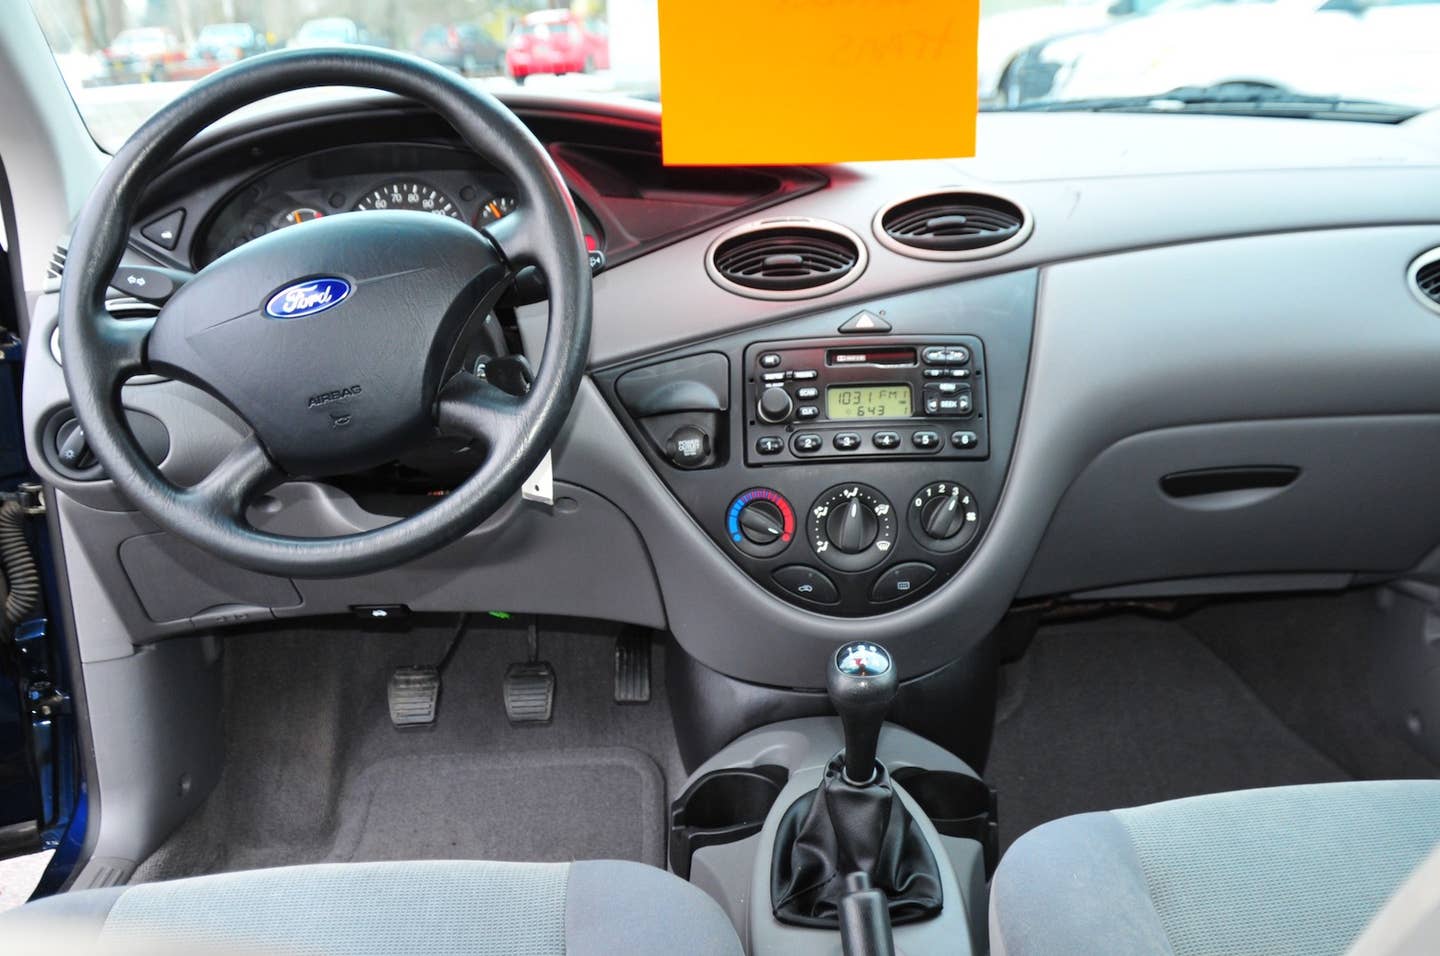 Preserved 2002 Ford Focus LX with 117 miles.